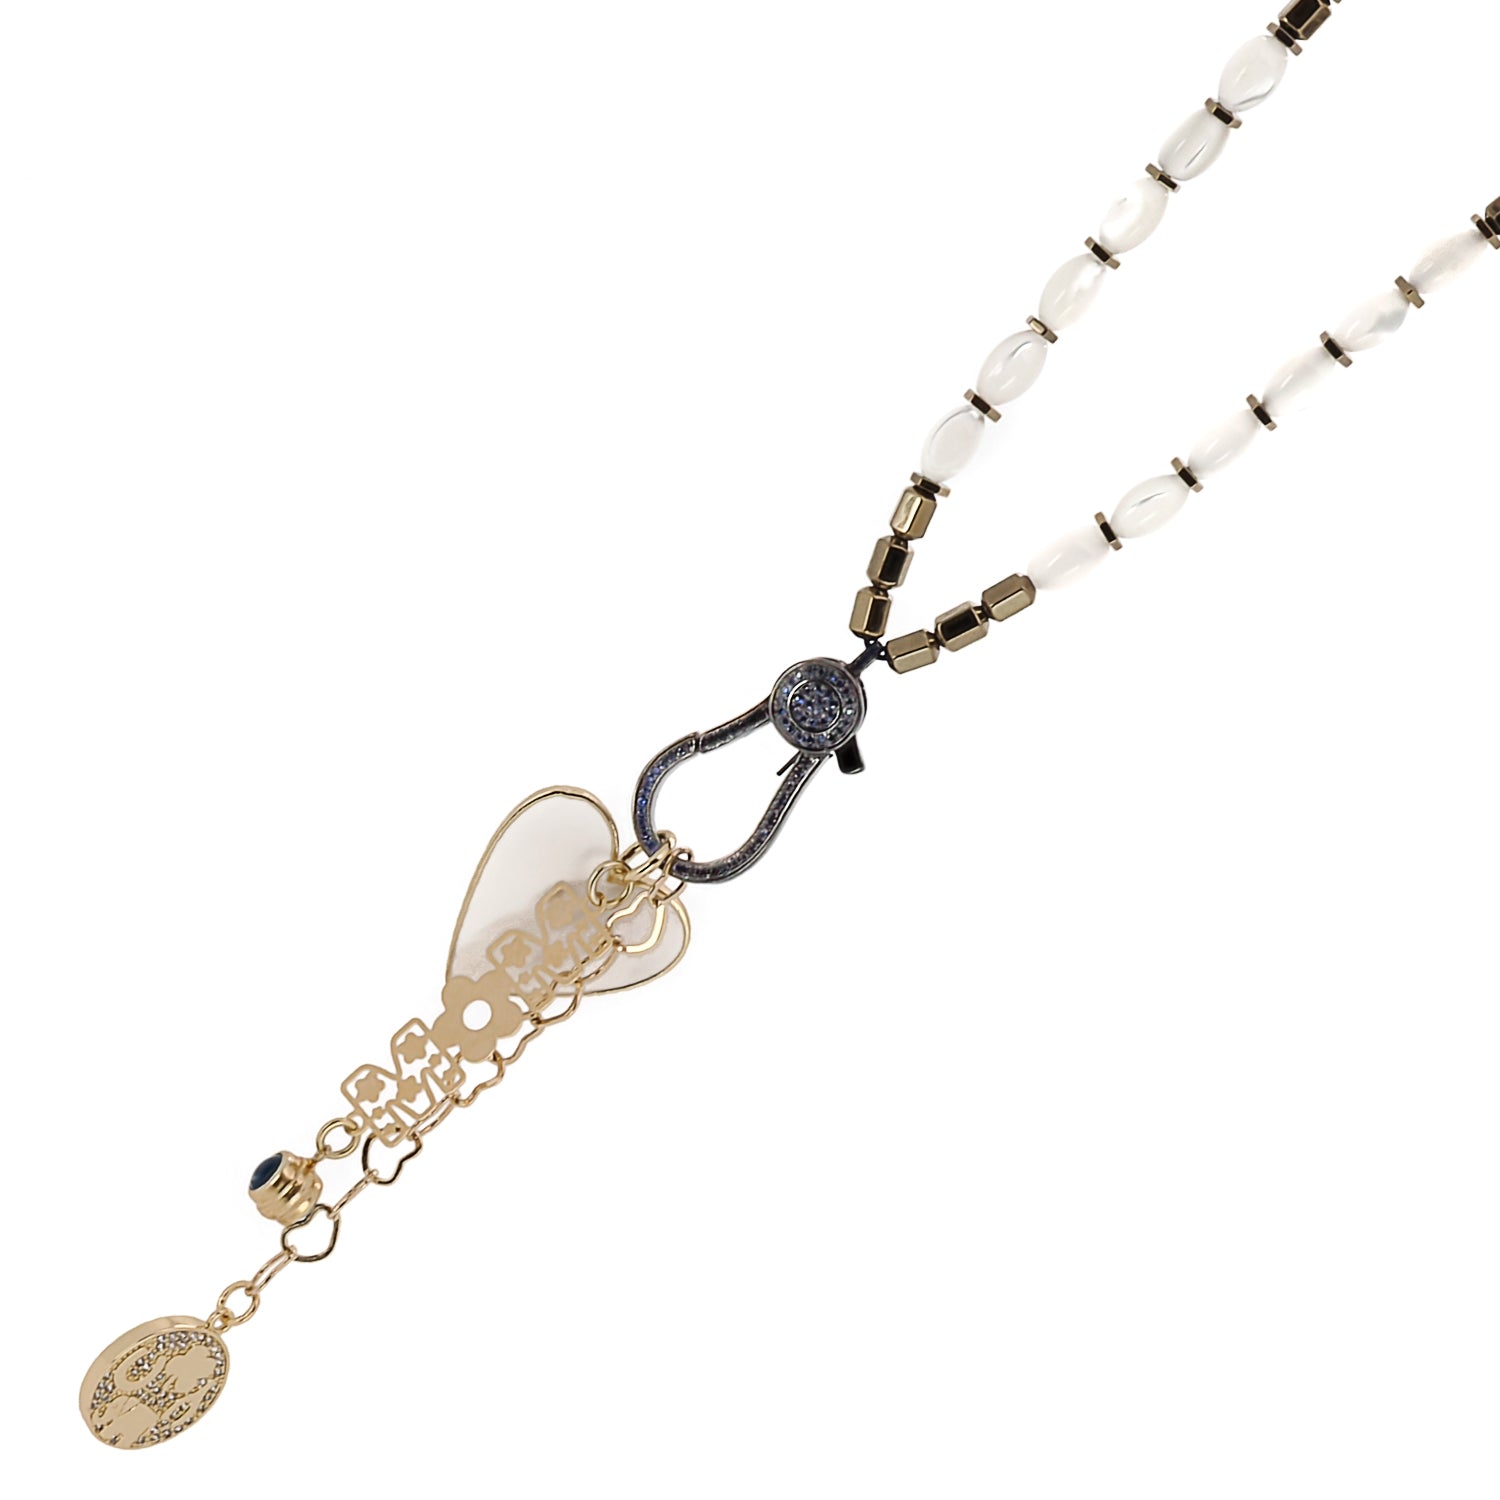 The 24k gold plated &quot;mom&quot; charm on the Pure Love Mom Necklace, symbolizing the special bond between a mother and child.